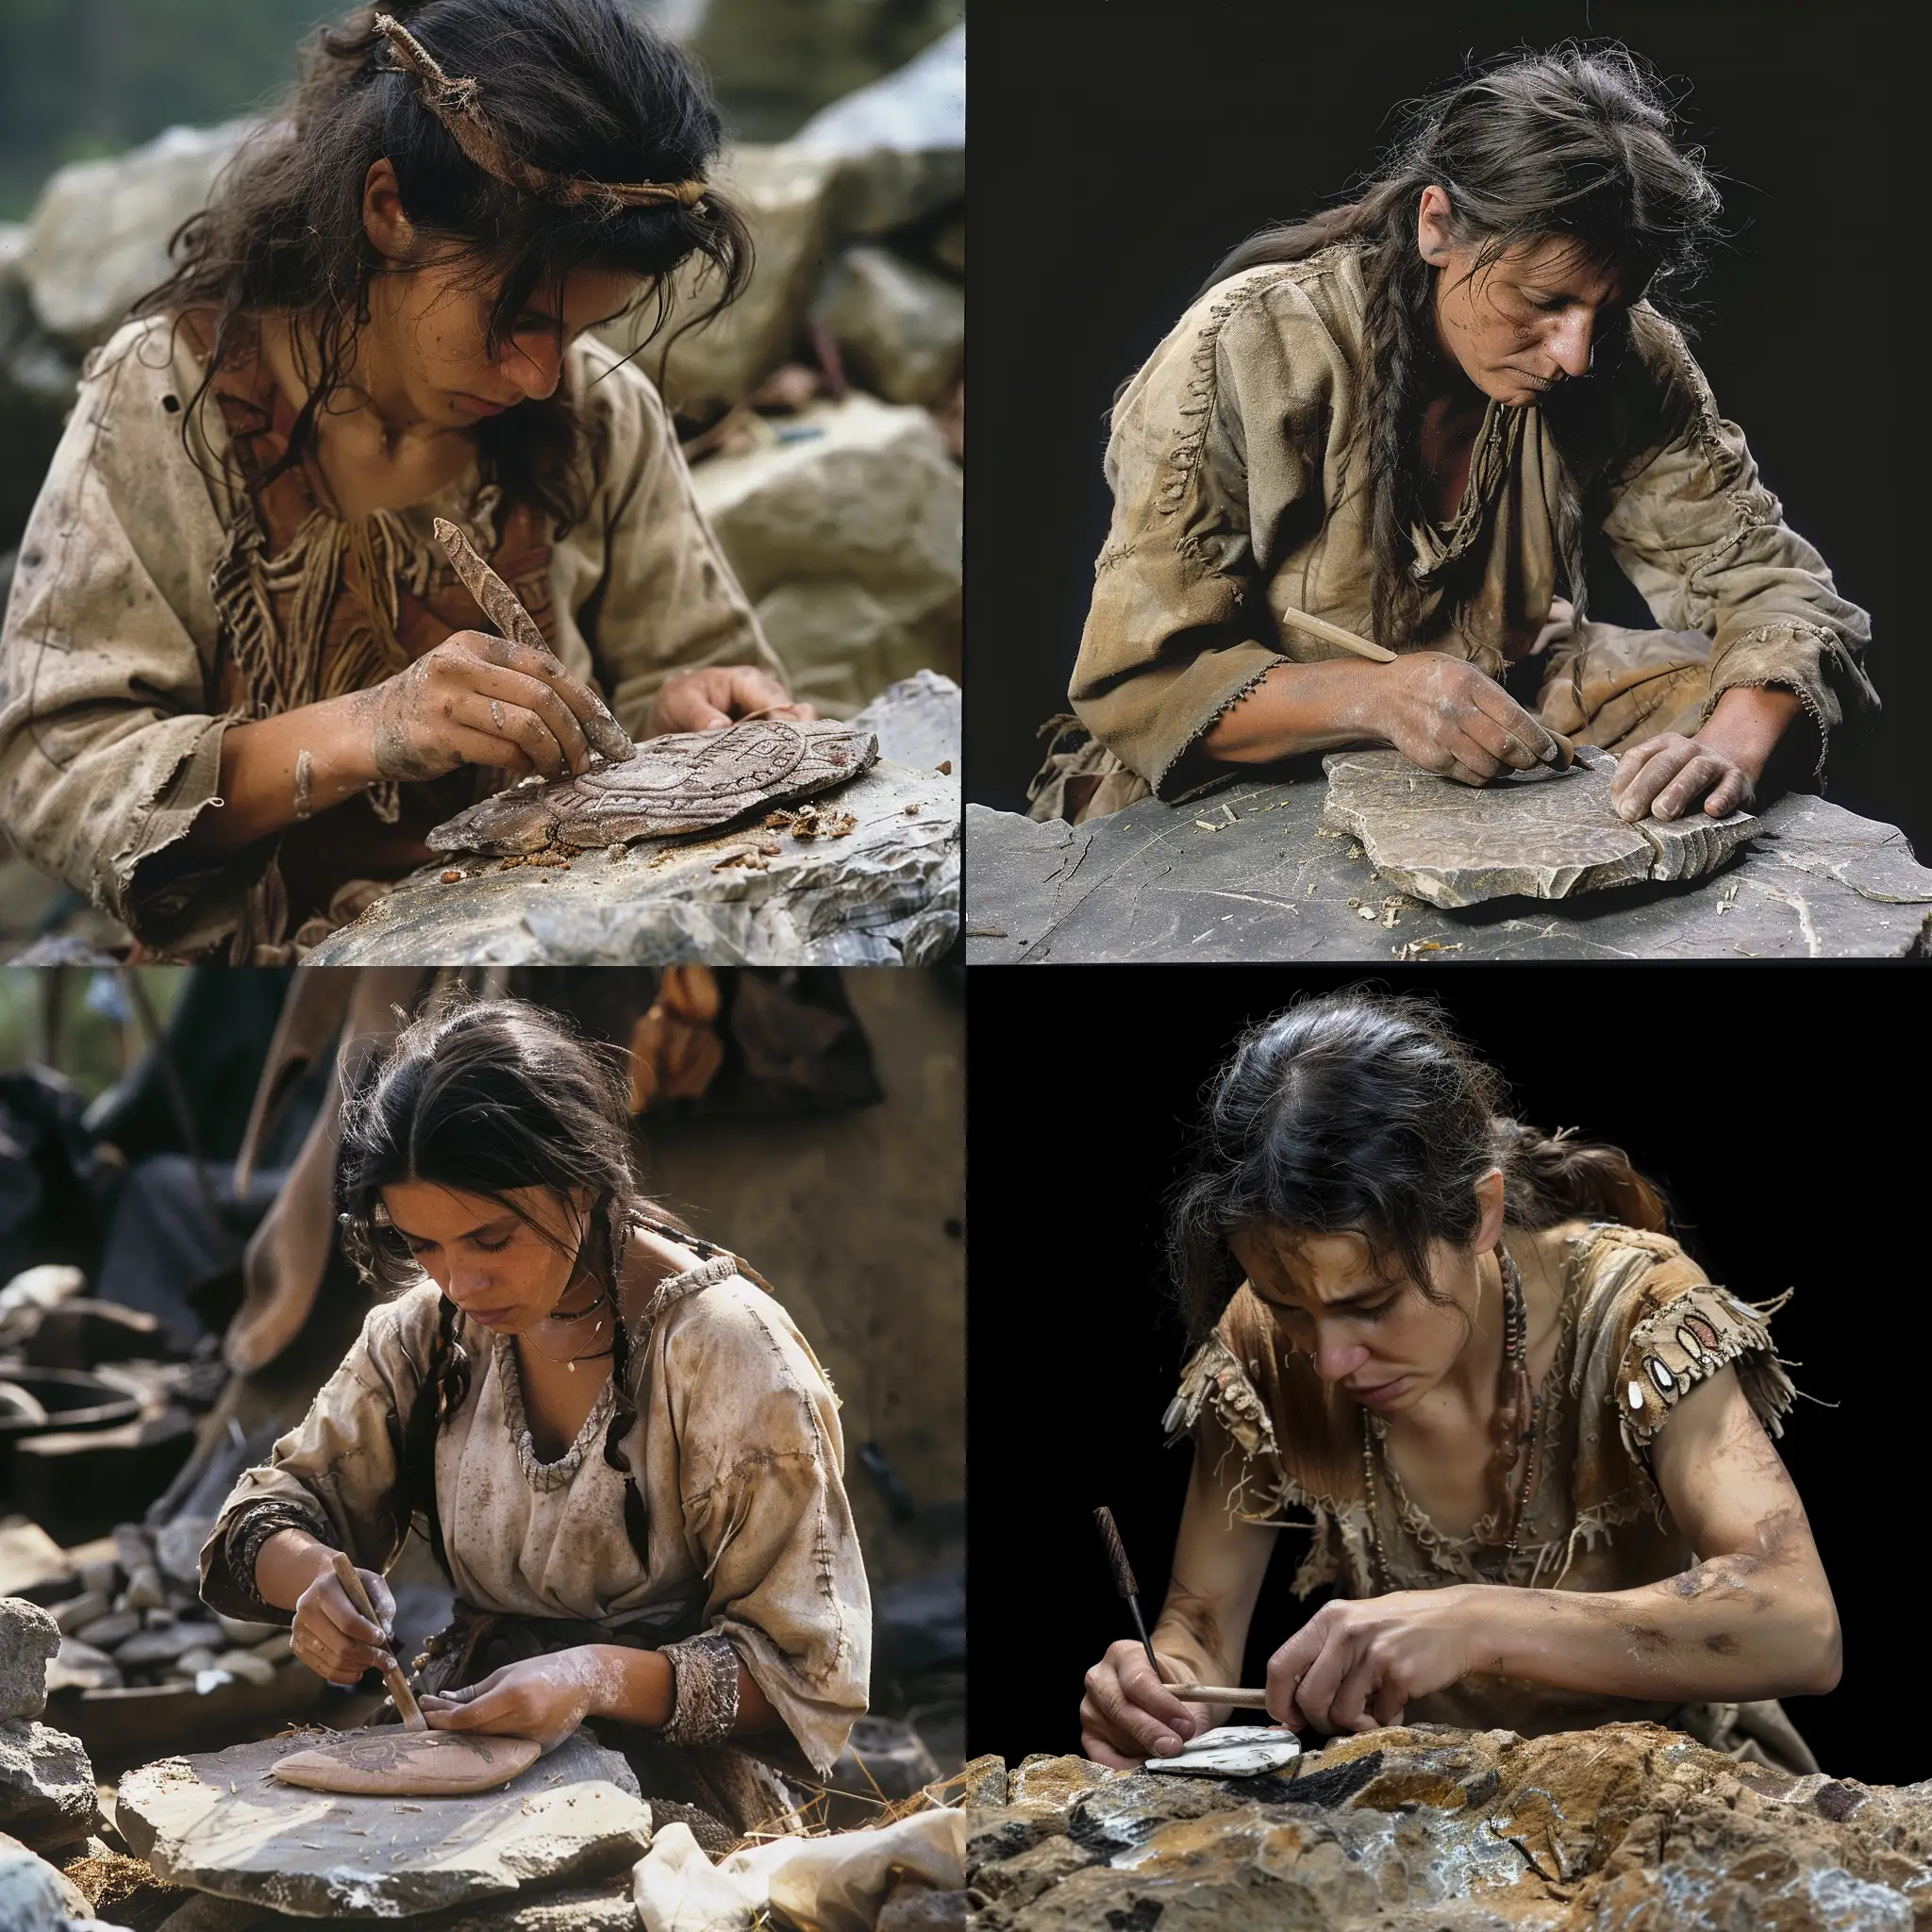 Ancient-Flint-Carving-Prehistoric-Woman-Crafting-with-Percuteur